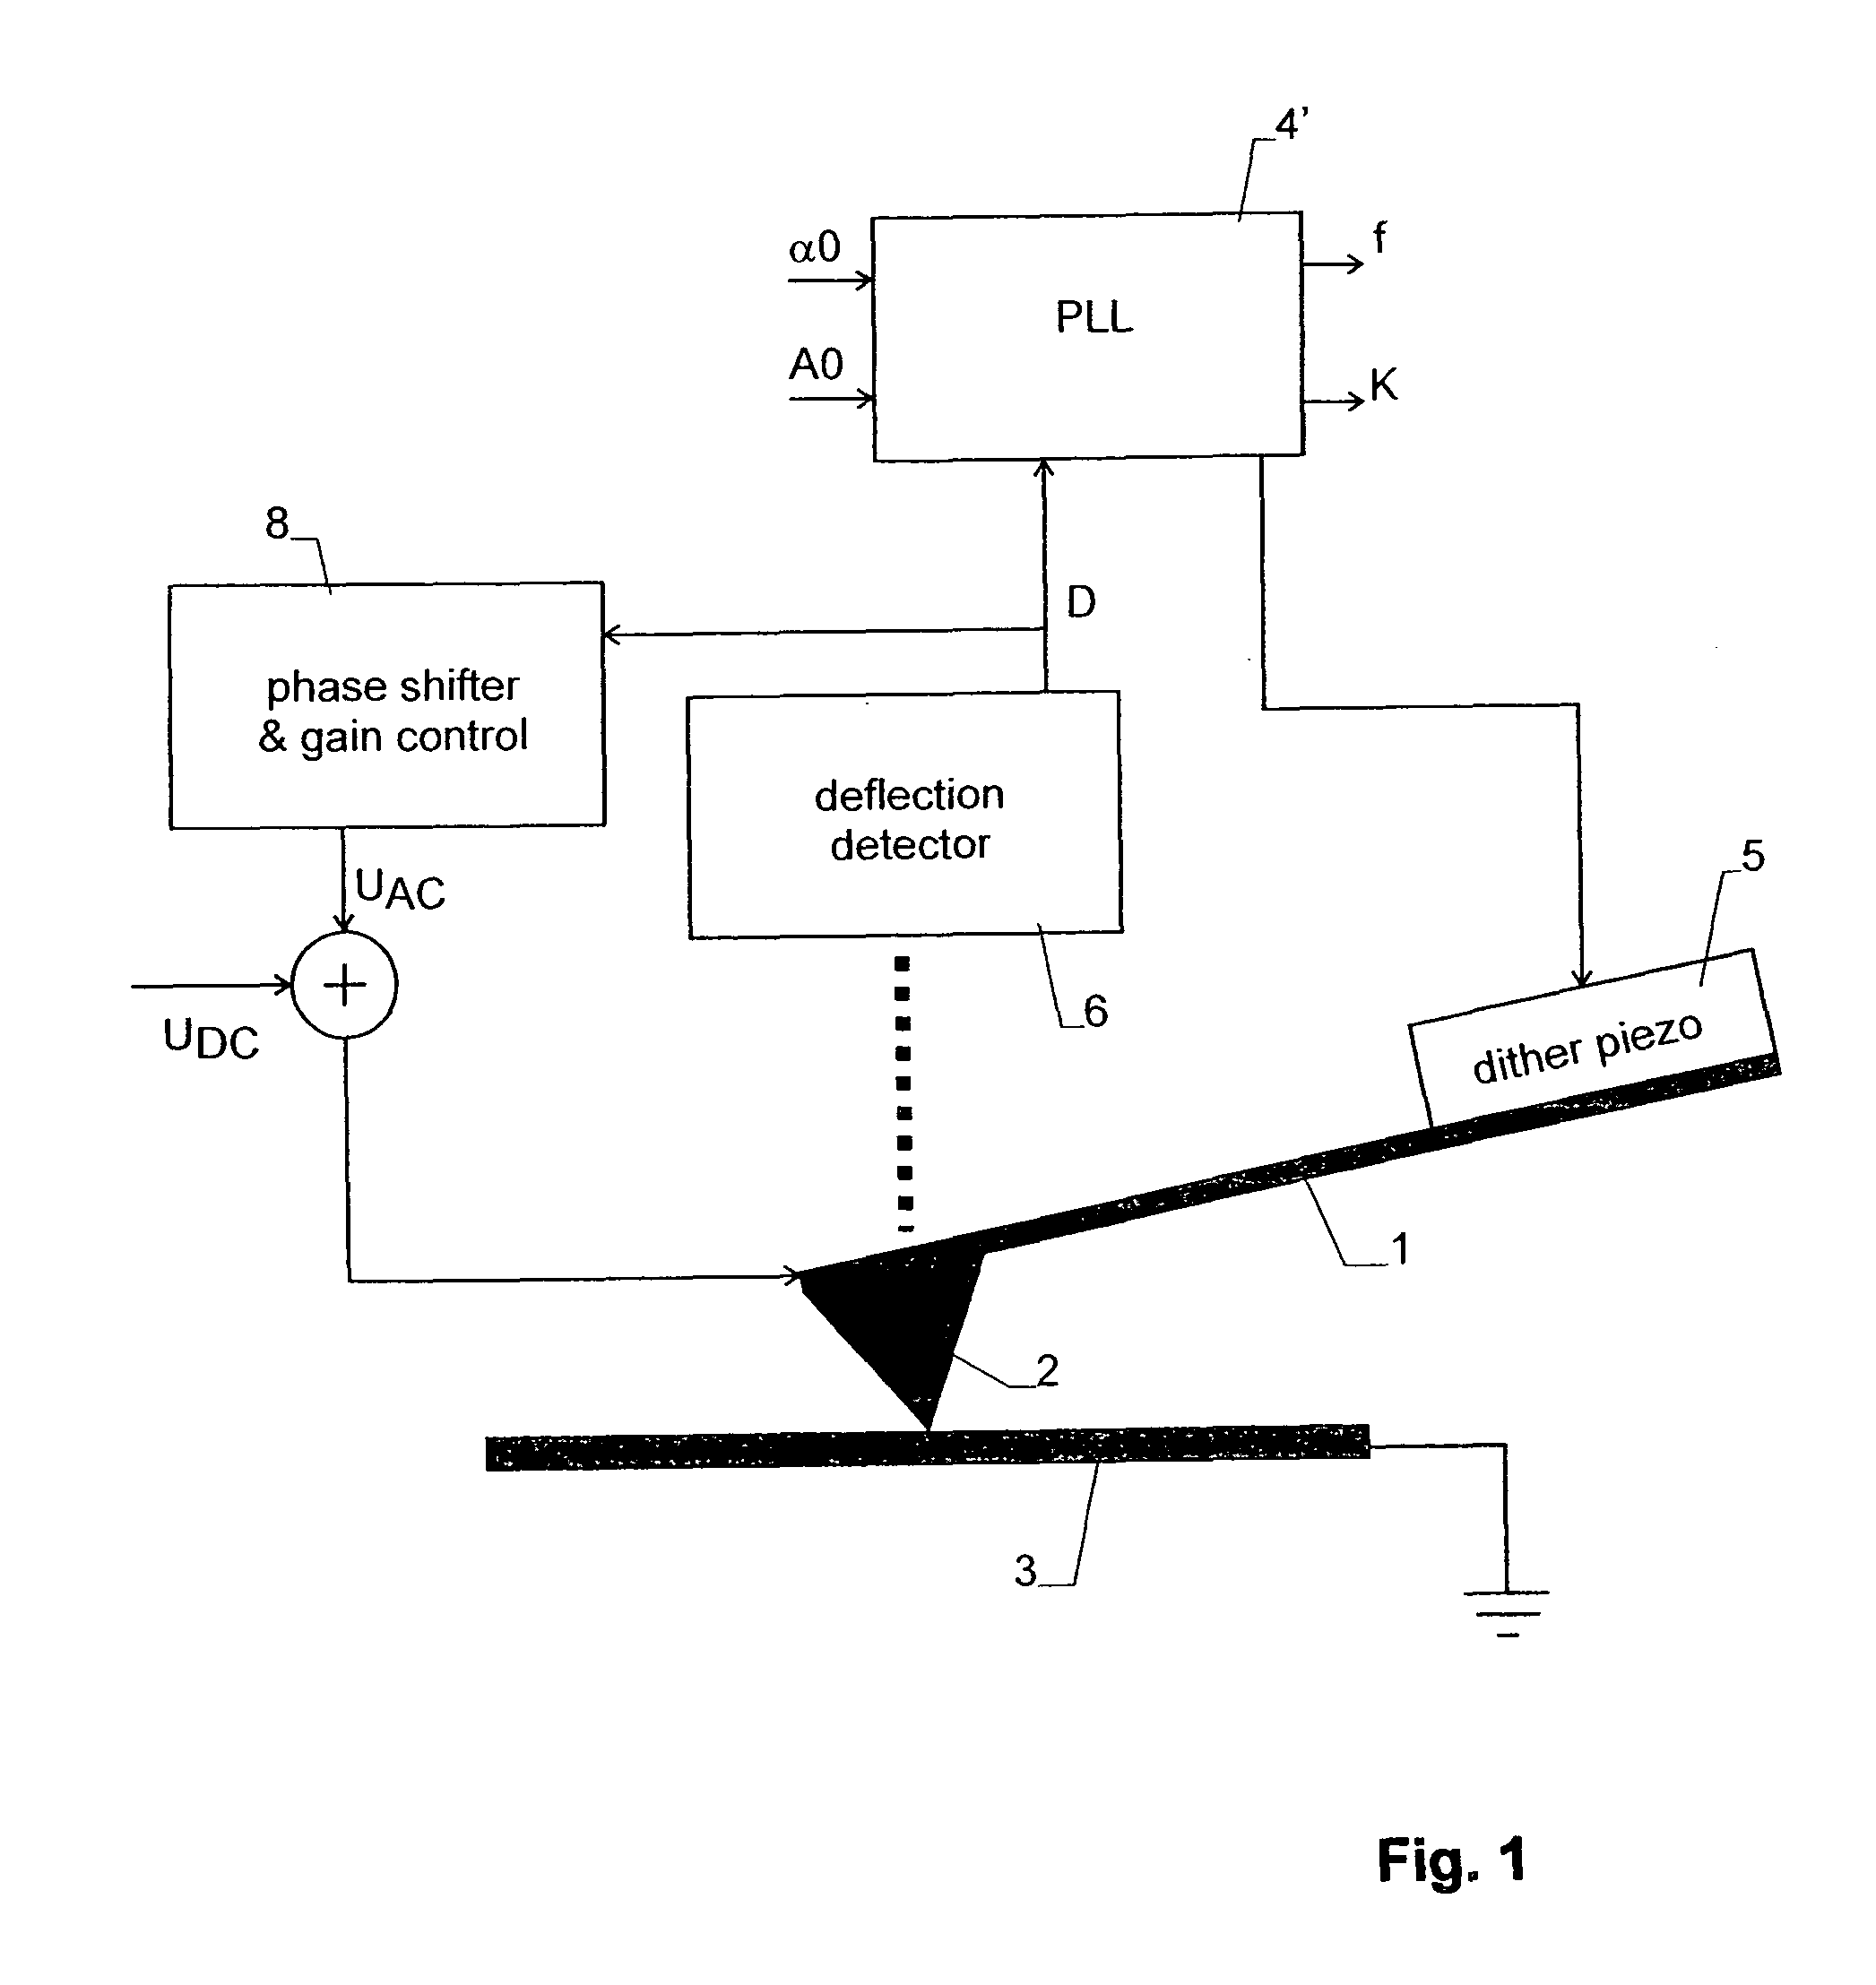 Method for Measuring a Piezoelectric Response by Means of a Scanning Probe Microscope